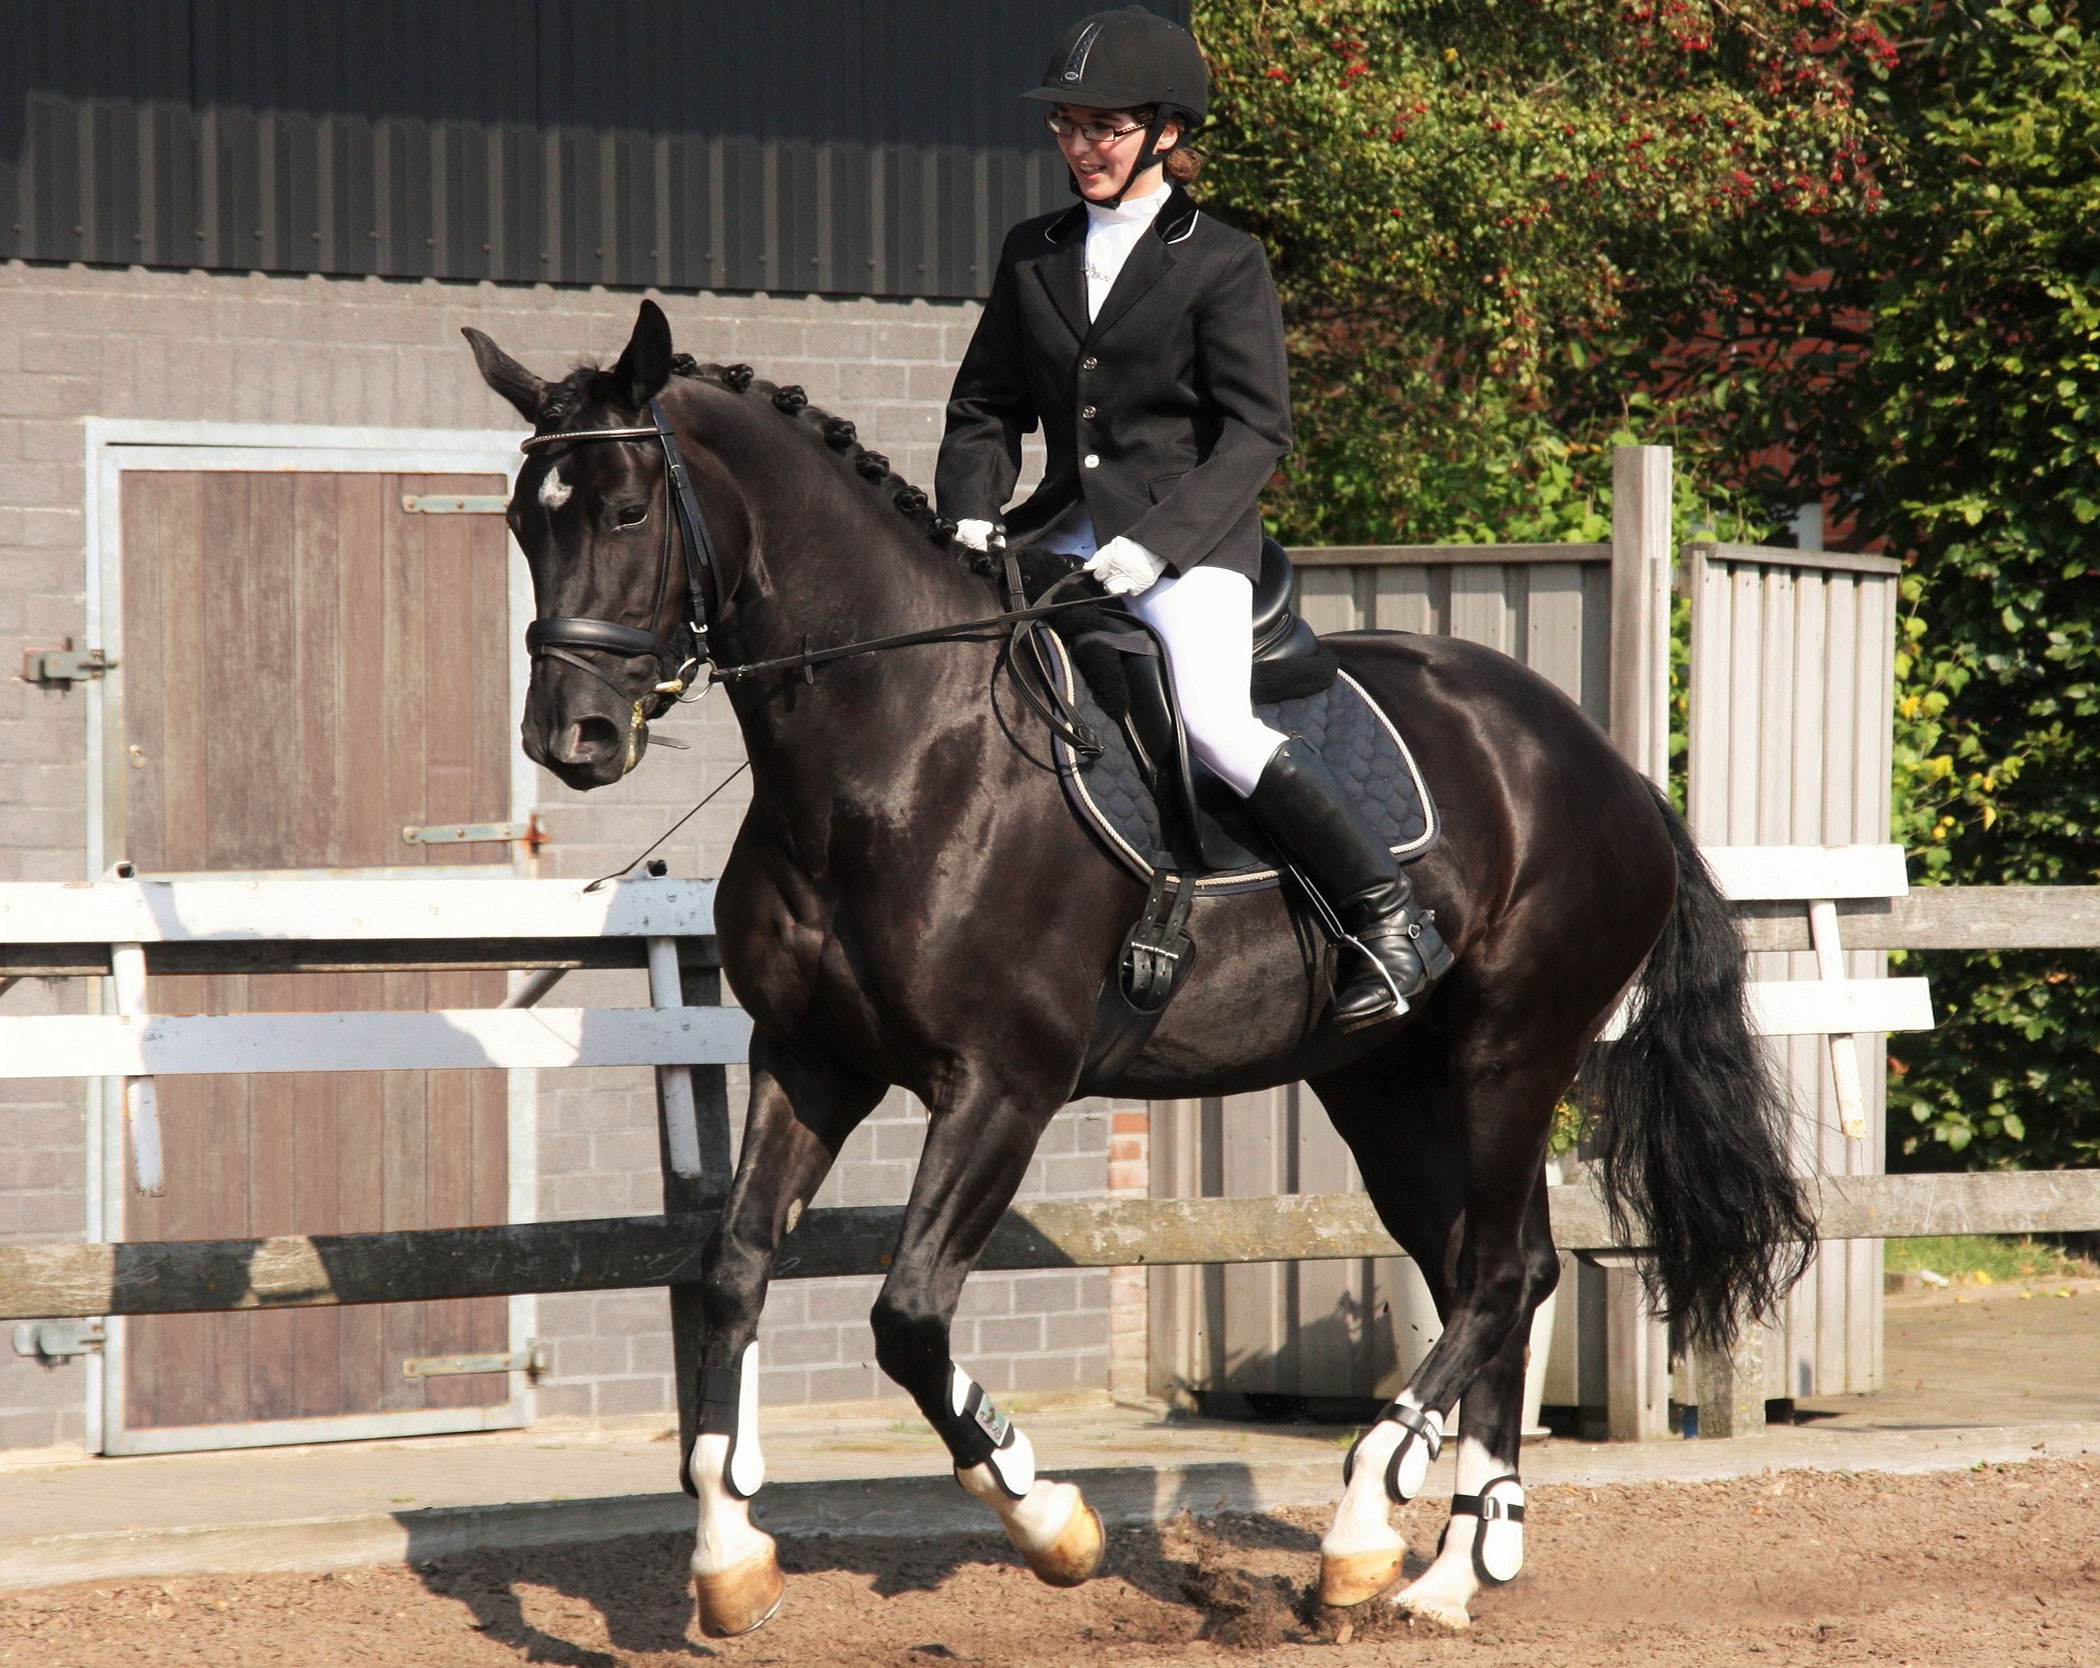 Dressage: The Walk of a Hanoverian horse, Free, energetic and relaxed marching gait, Equestrian sports, Saddle riding. 2100x1670 HD Background.